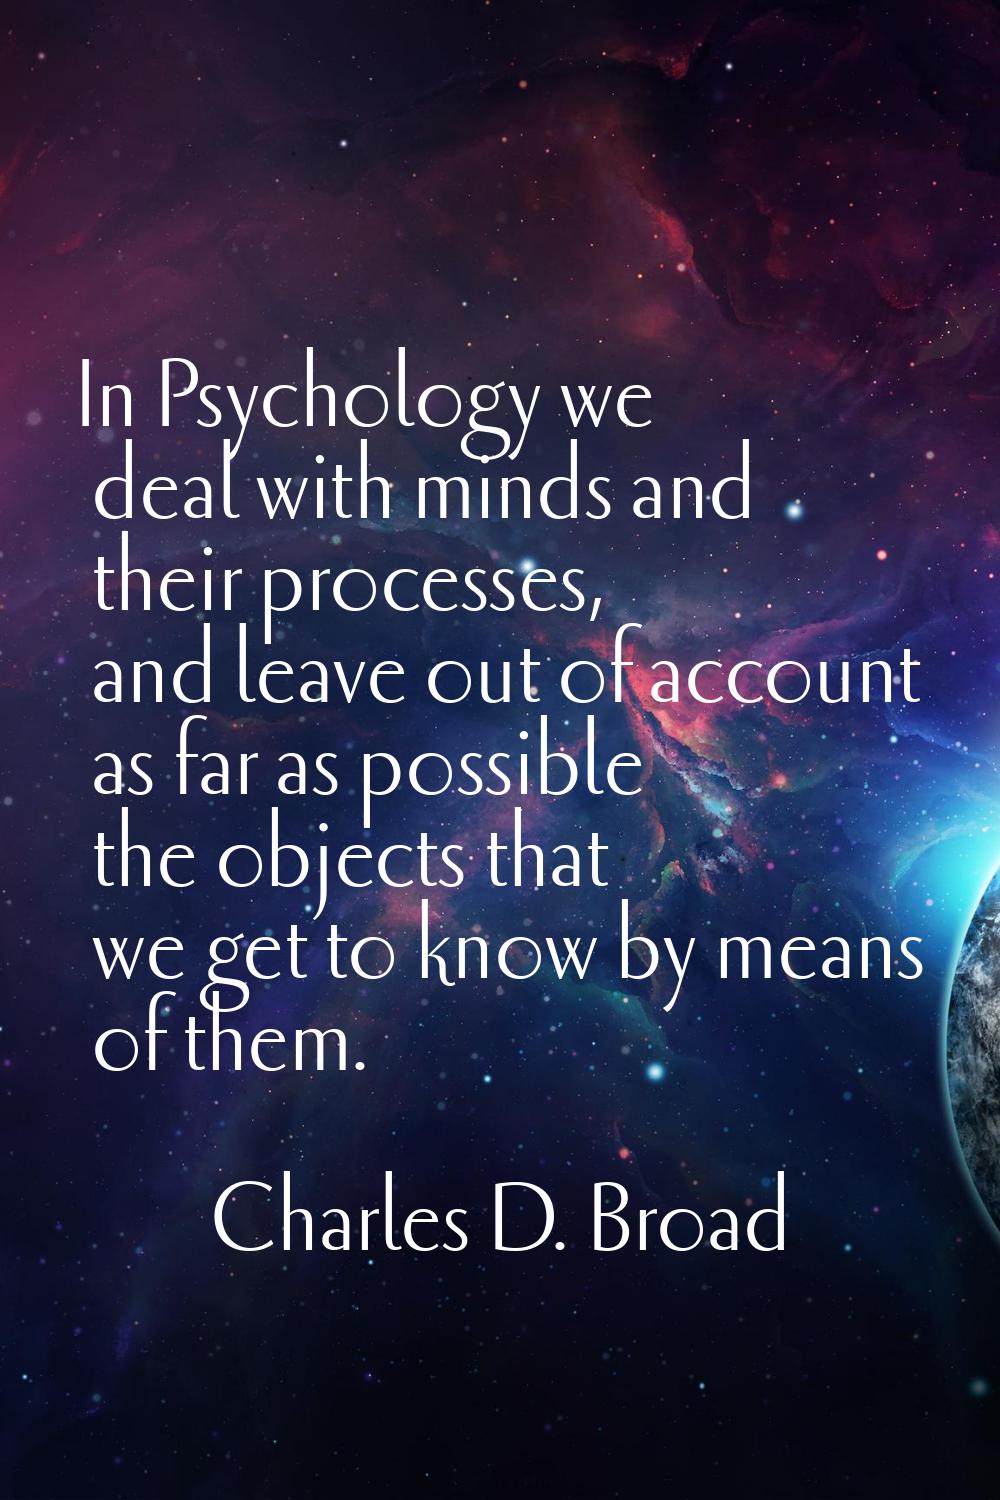 In Psychology we deal with minds and their processes, and leave out of account as far as possible t